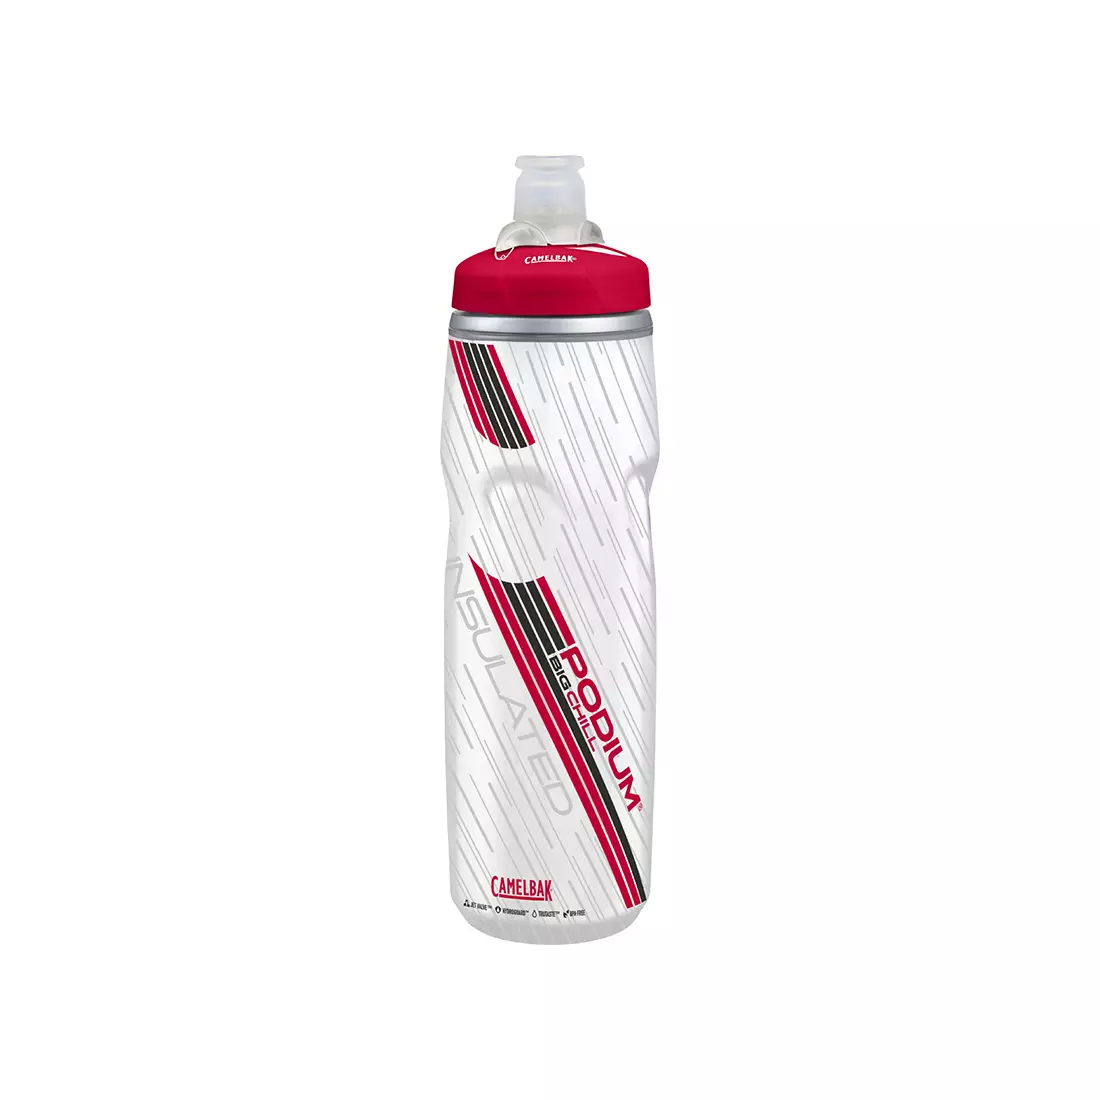 Camelbak SS17 thermal bicycle bottle Podium Big Chill 25oz/ 750 ml Red